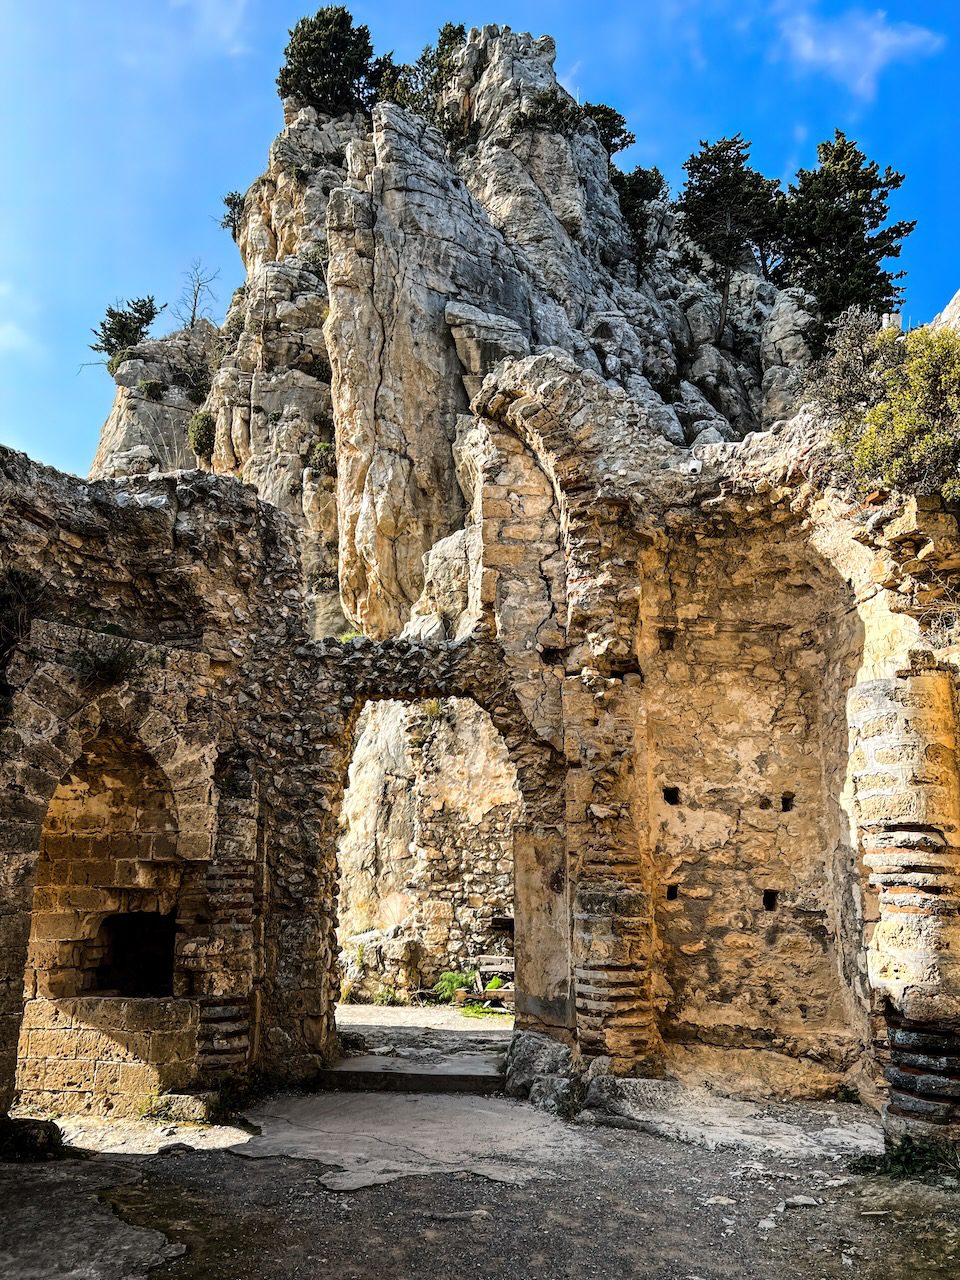 Rugged ruins of St. Hilarion Castle in Cyprus, with arches and remnants of walls set against a dramatic rocky backdrop.